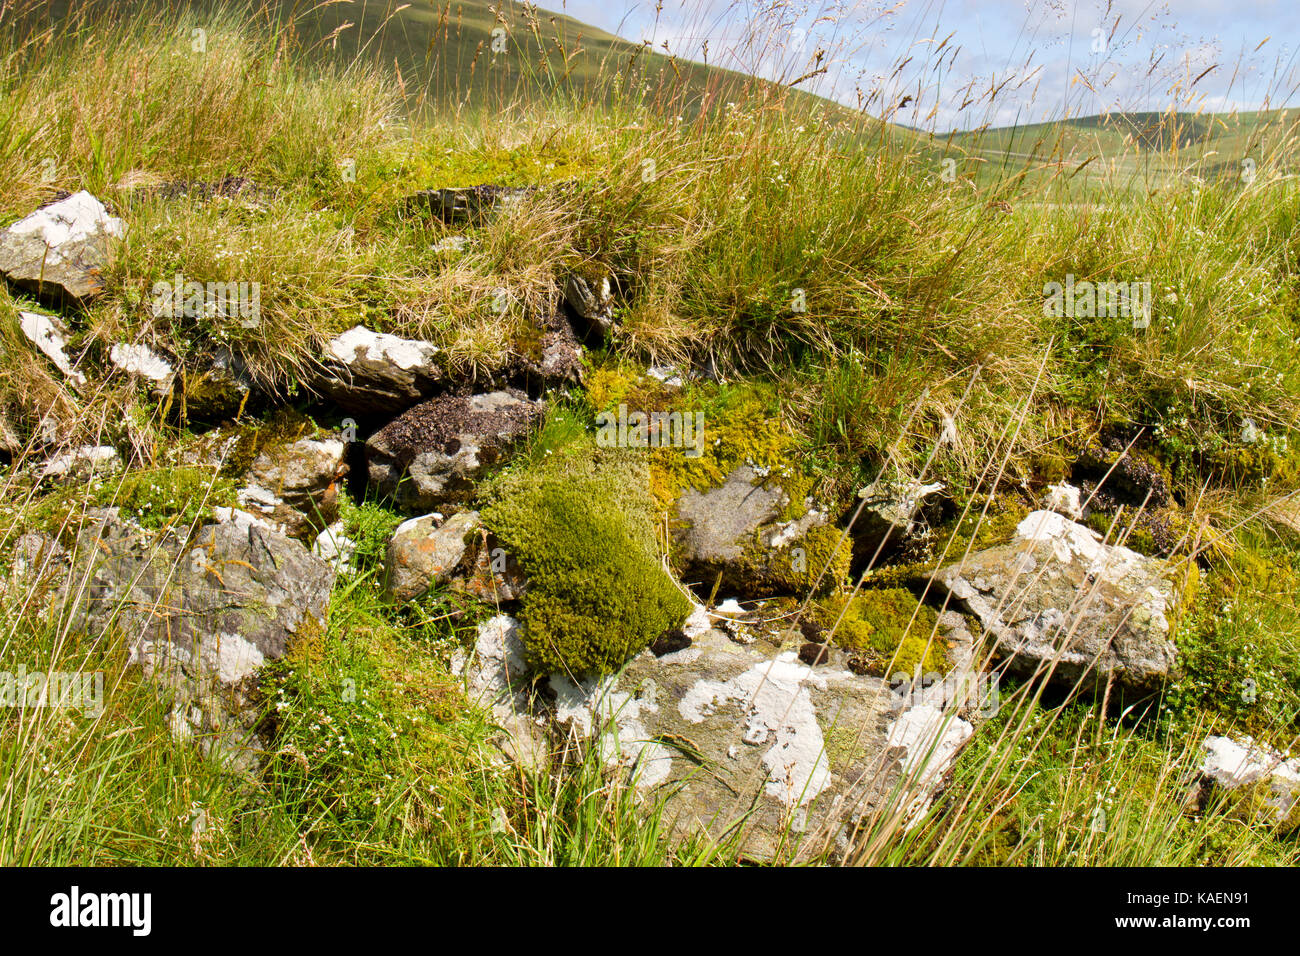 Stone and turf wall with growing mosses and grasses in an upland area. Near Nant-y-moch reservoir. Ceredigion, Wales. July. Stock Photo